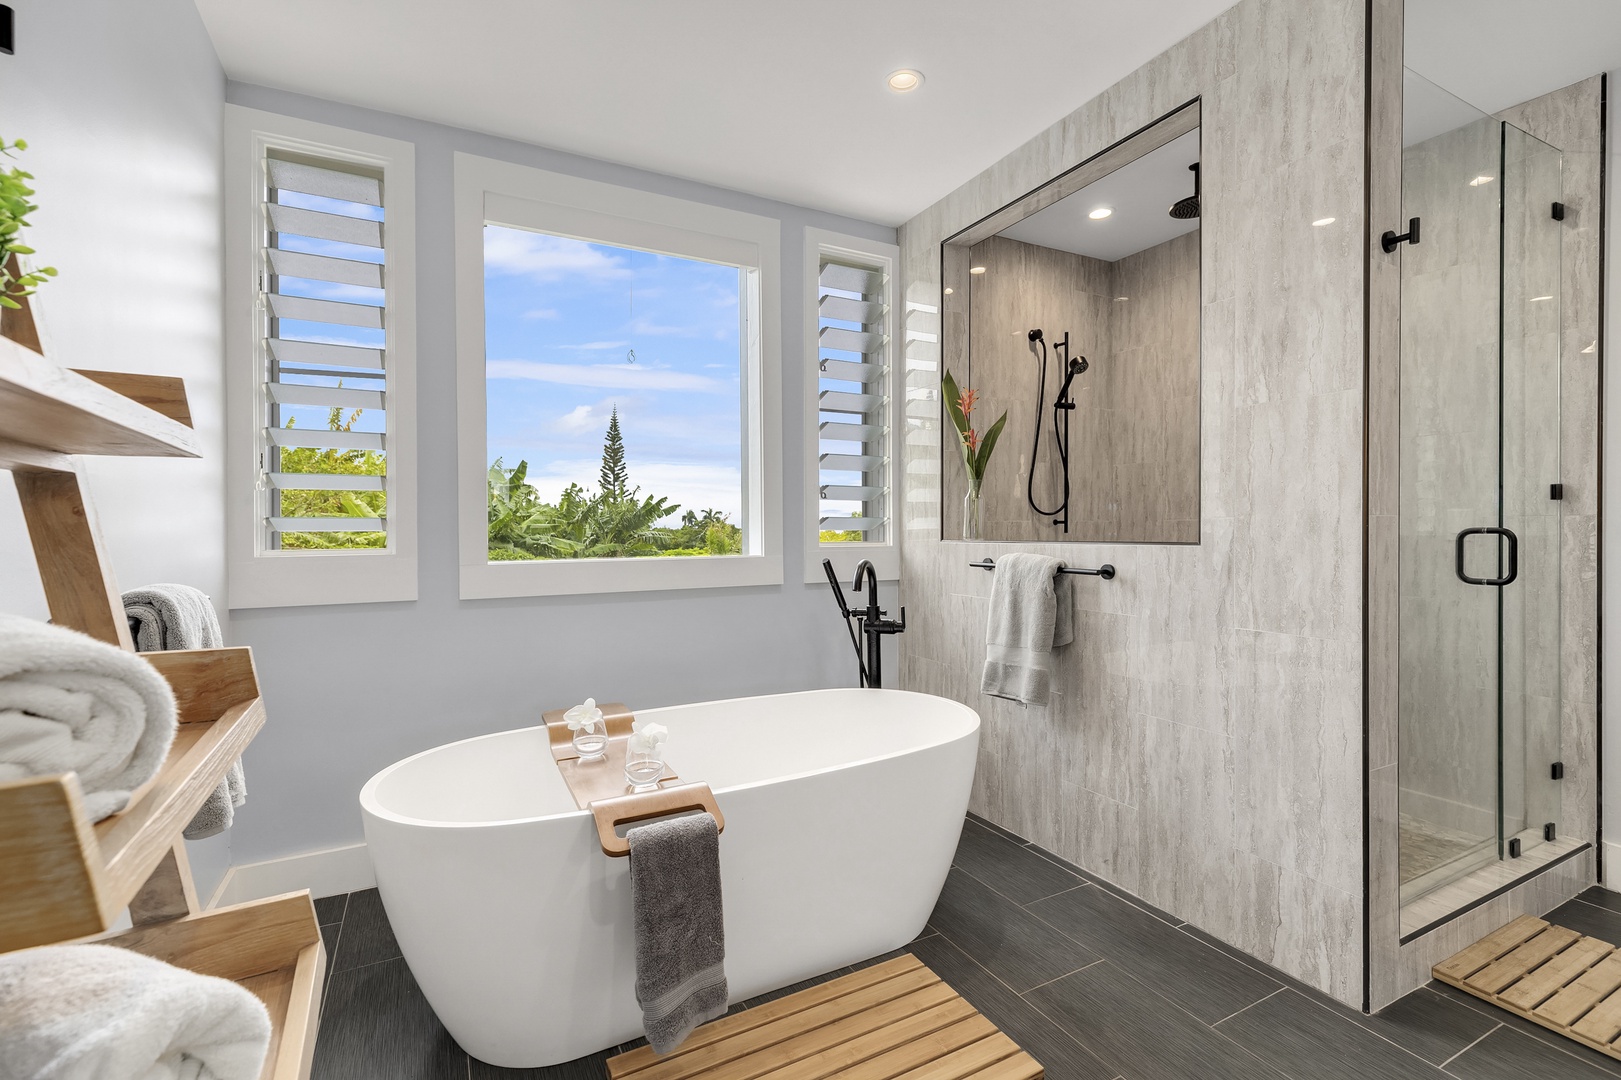 Haleiwa Vacation Rentals, Hale Mahina - Primary bath with soaking tub, custom shower and views of the greenery outdoors.